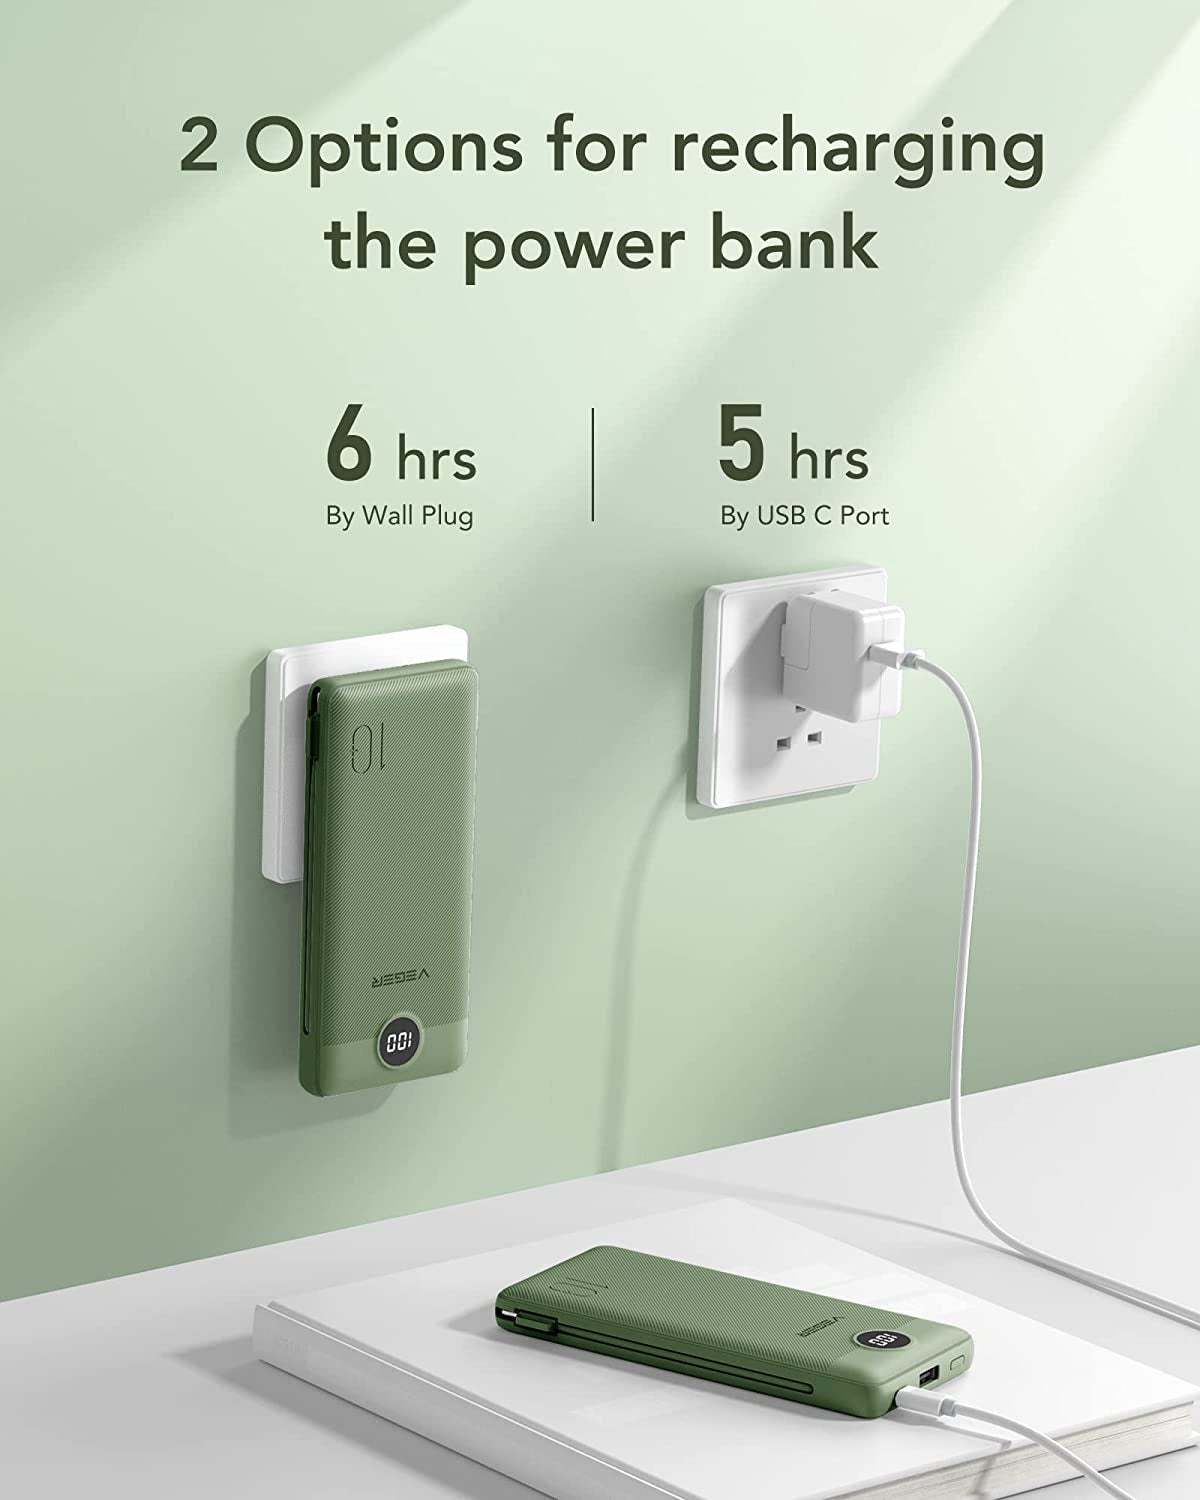 Slim USB C Portable Charger with Built-in Cables - Fast Charging Power Bank for iPhones, iPads, Samsung, and More, with Wall Plug and 10000mAh Capacity (Green)